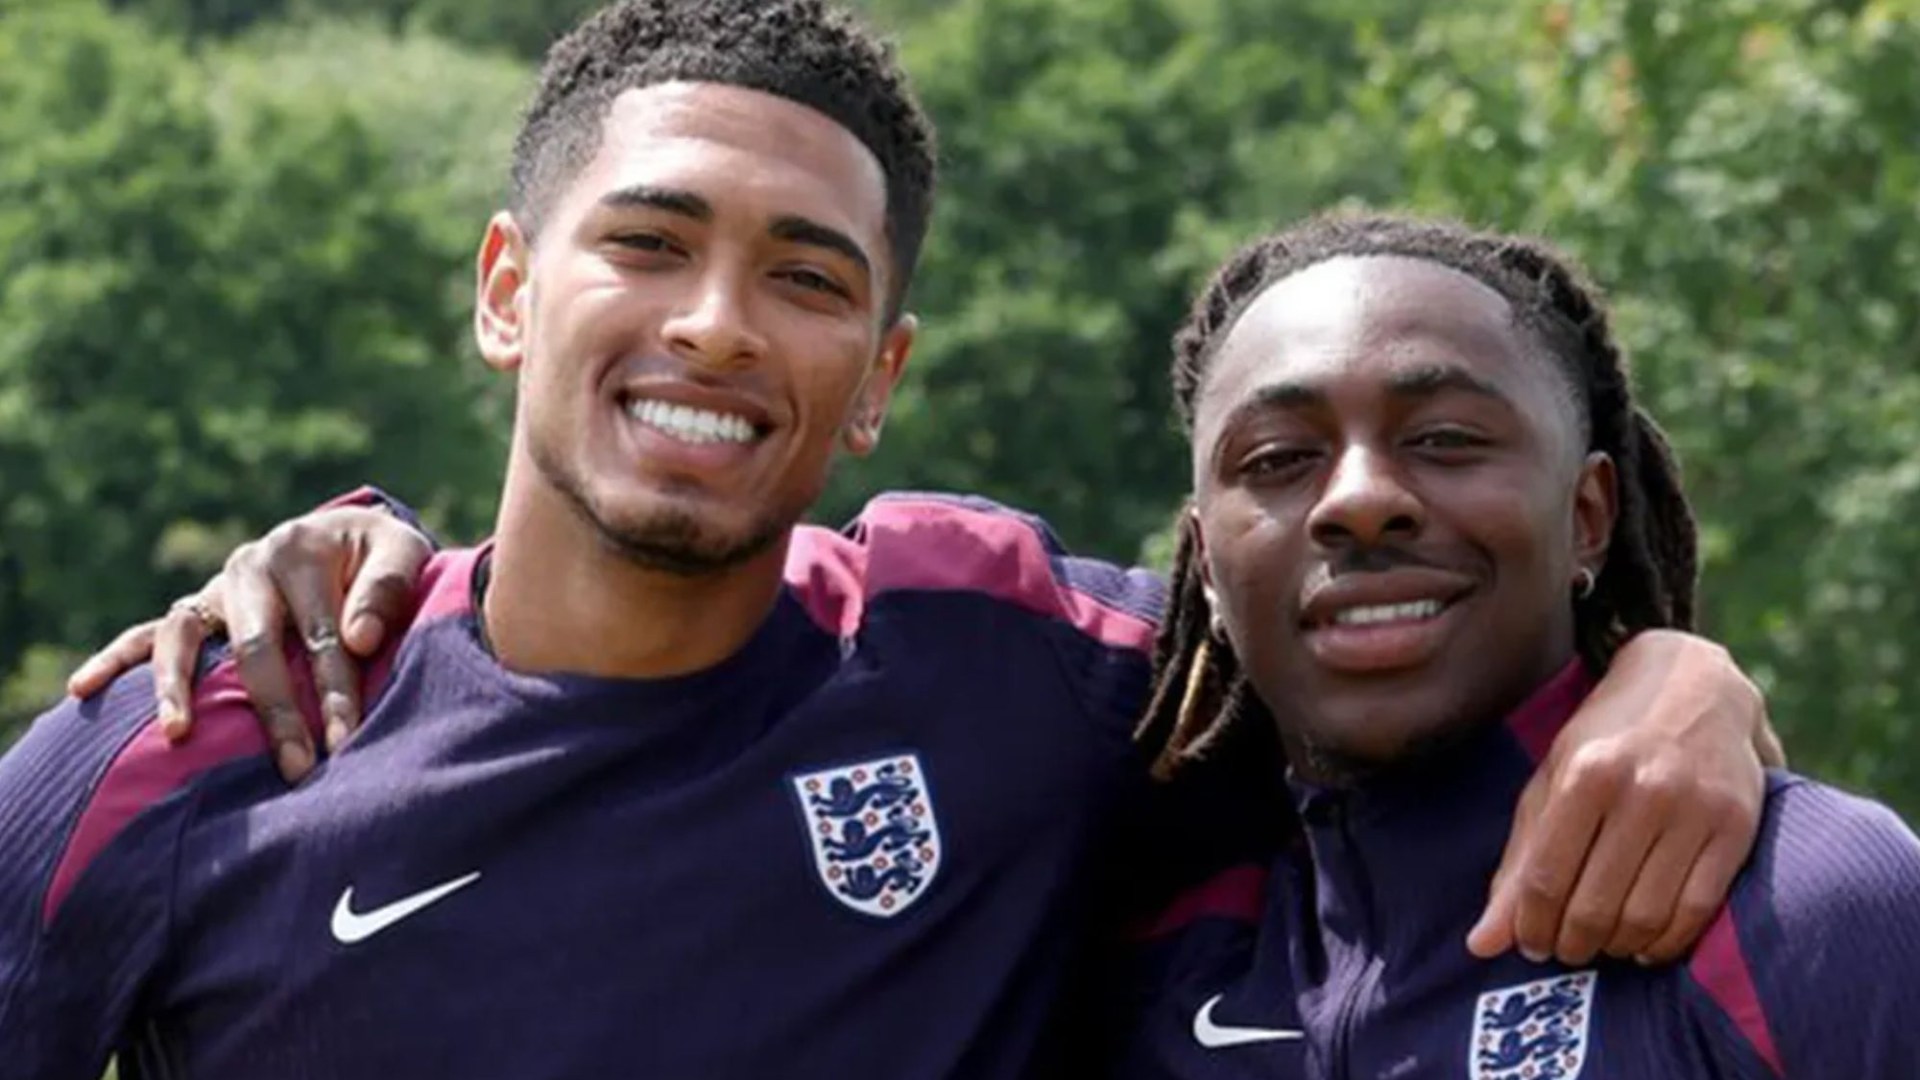 England stars Jude Bellingham and Eberechi Eze both celebrate their birthdays at Euros base  but missed out on cake [Video]